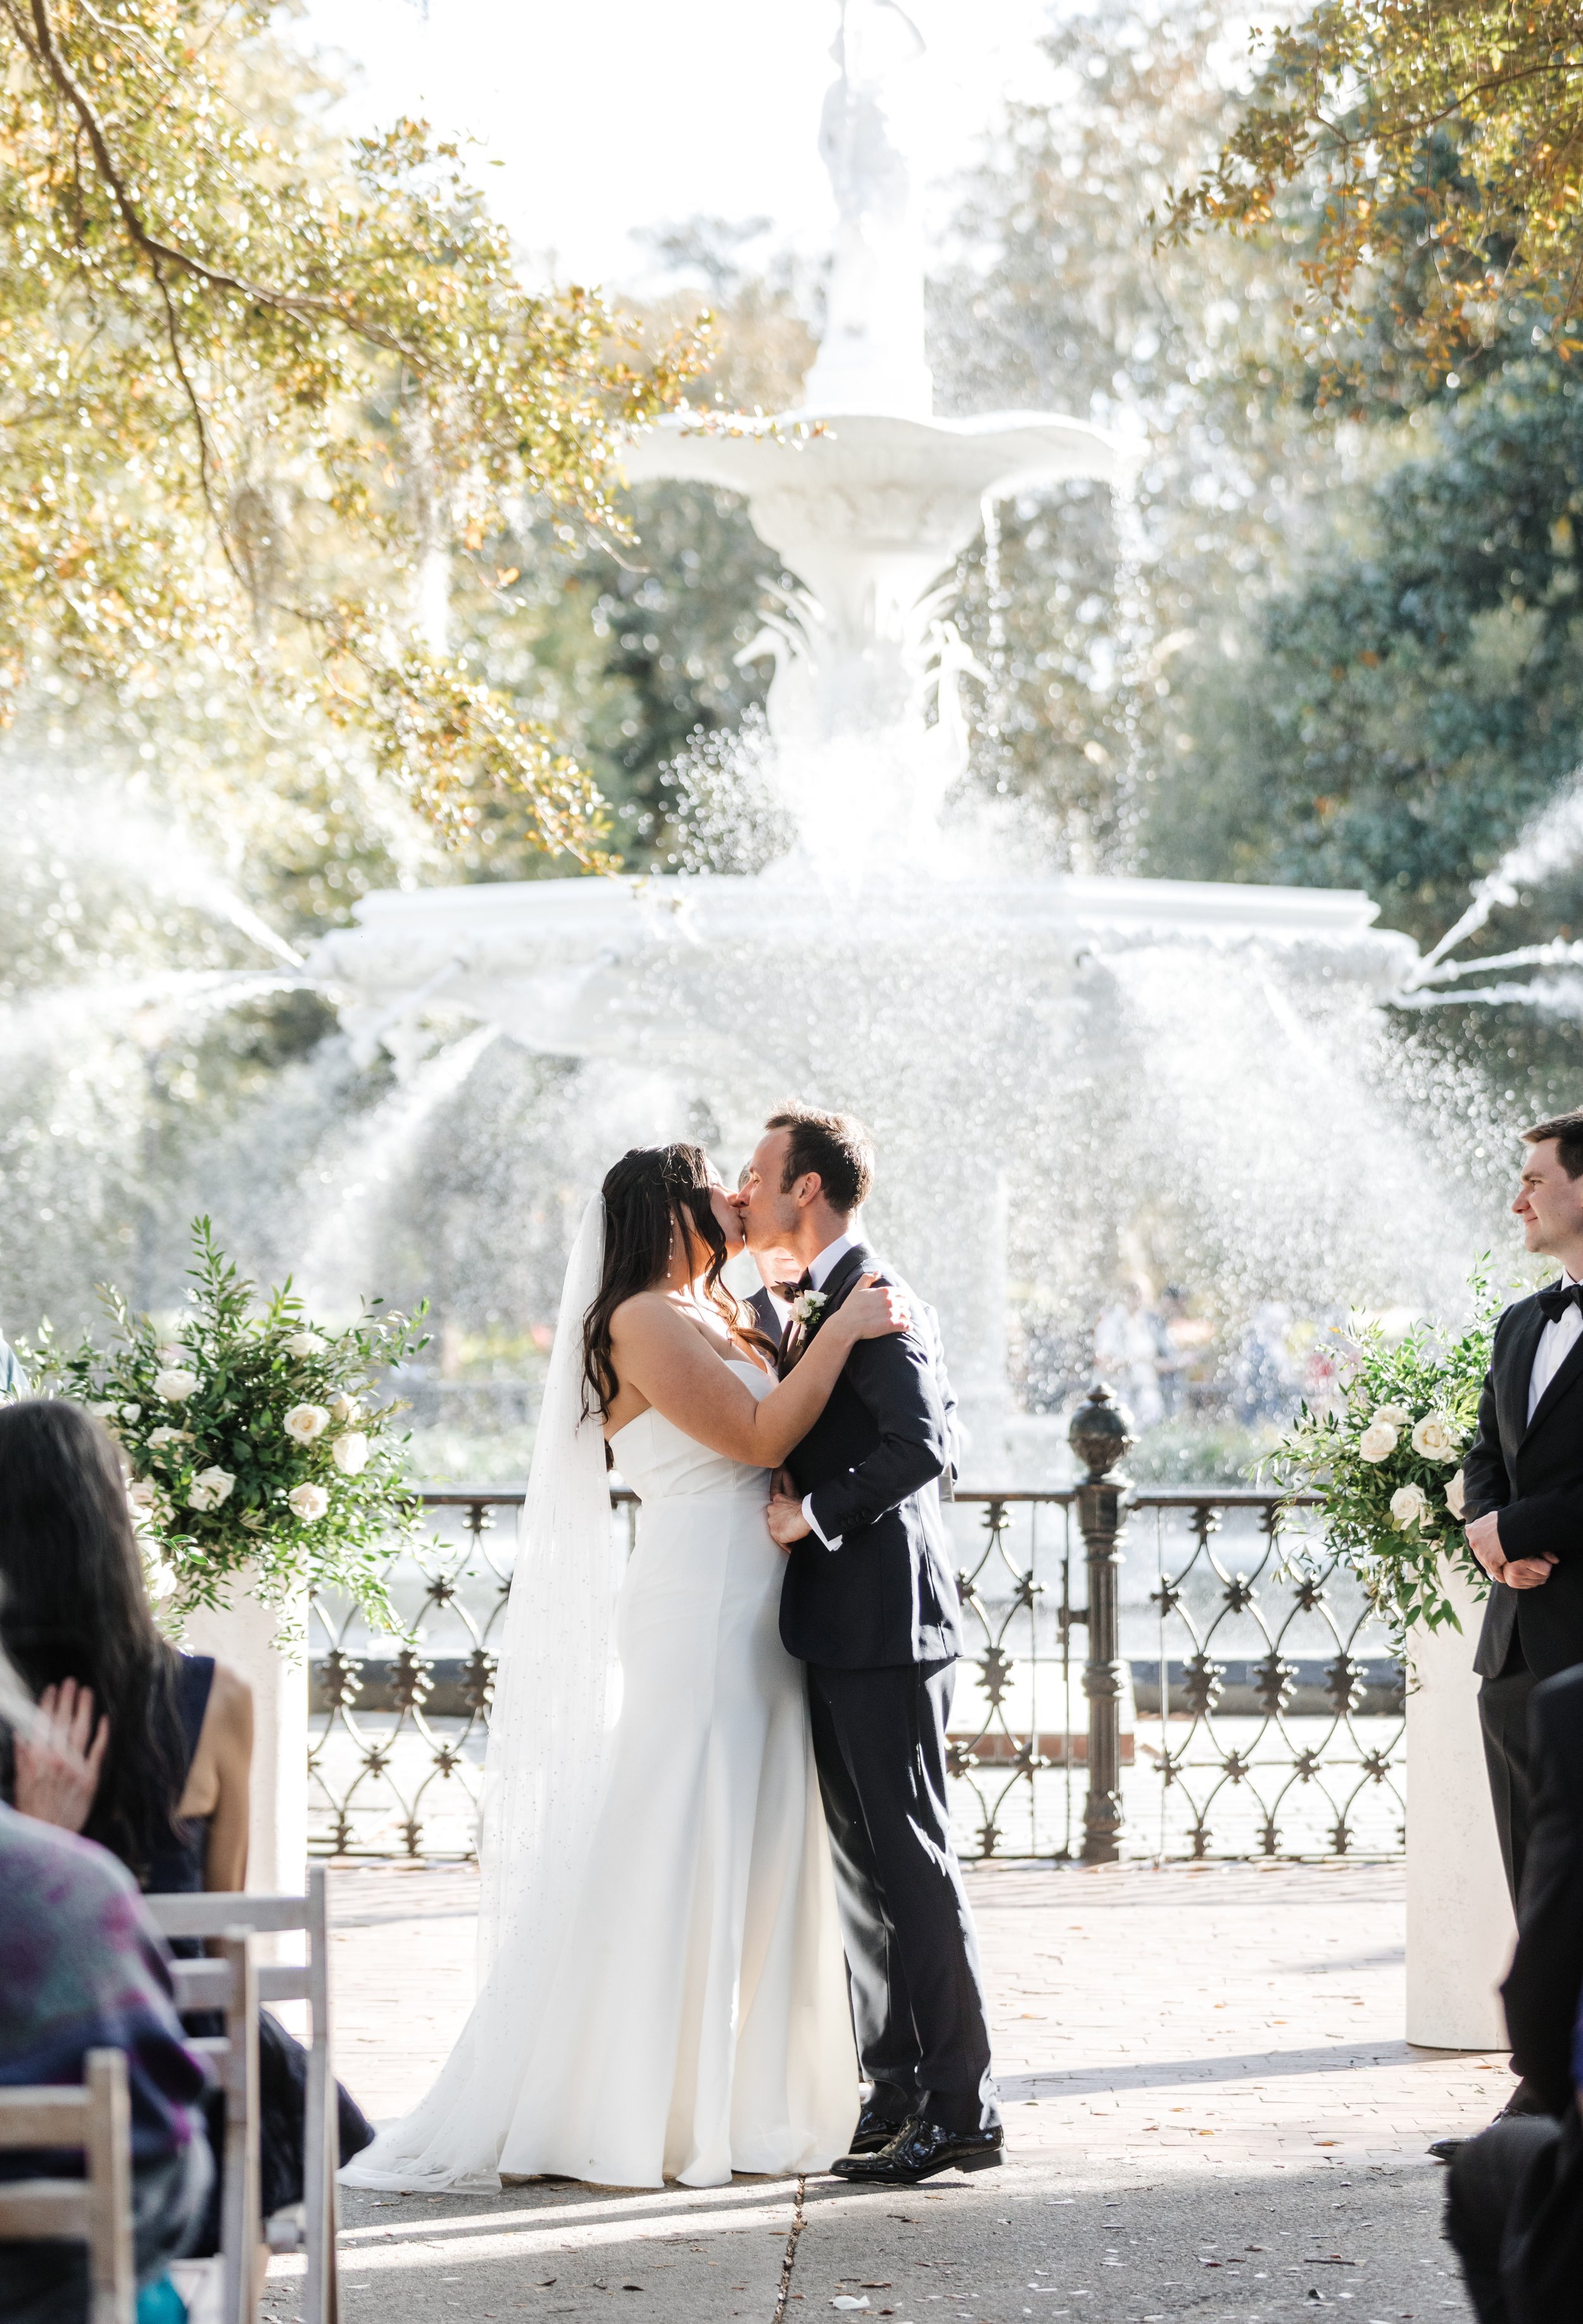 ivory-and-beau-wedding-and-florals-annelise-and-preston-wedding-blog-savannah-wedding-savannah-wedding-coordinator-savannah-florsit-wedding-florist-southern-wedding-forsyth-park-fountain-soho-south-savannah-wedding-gmp20199345221-104.jpg